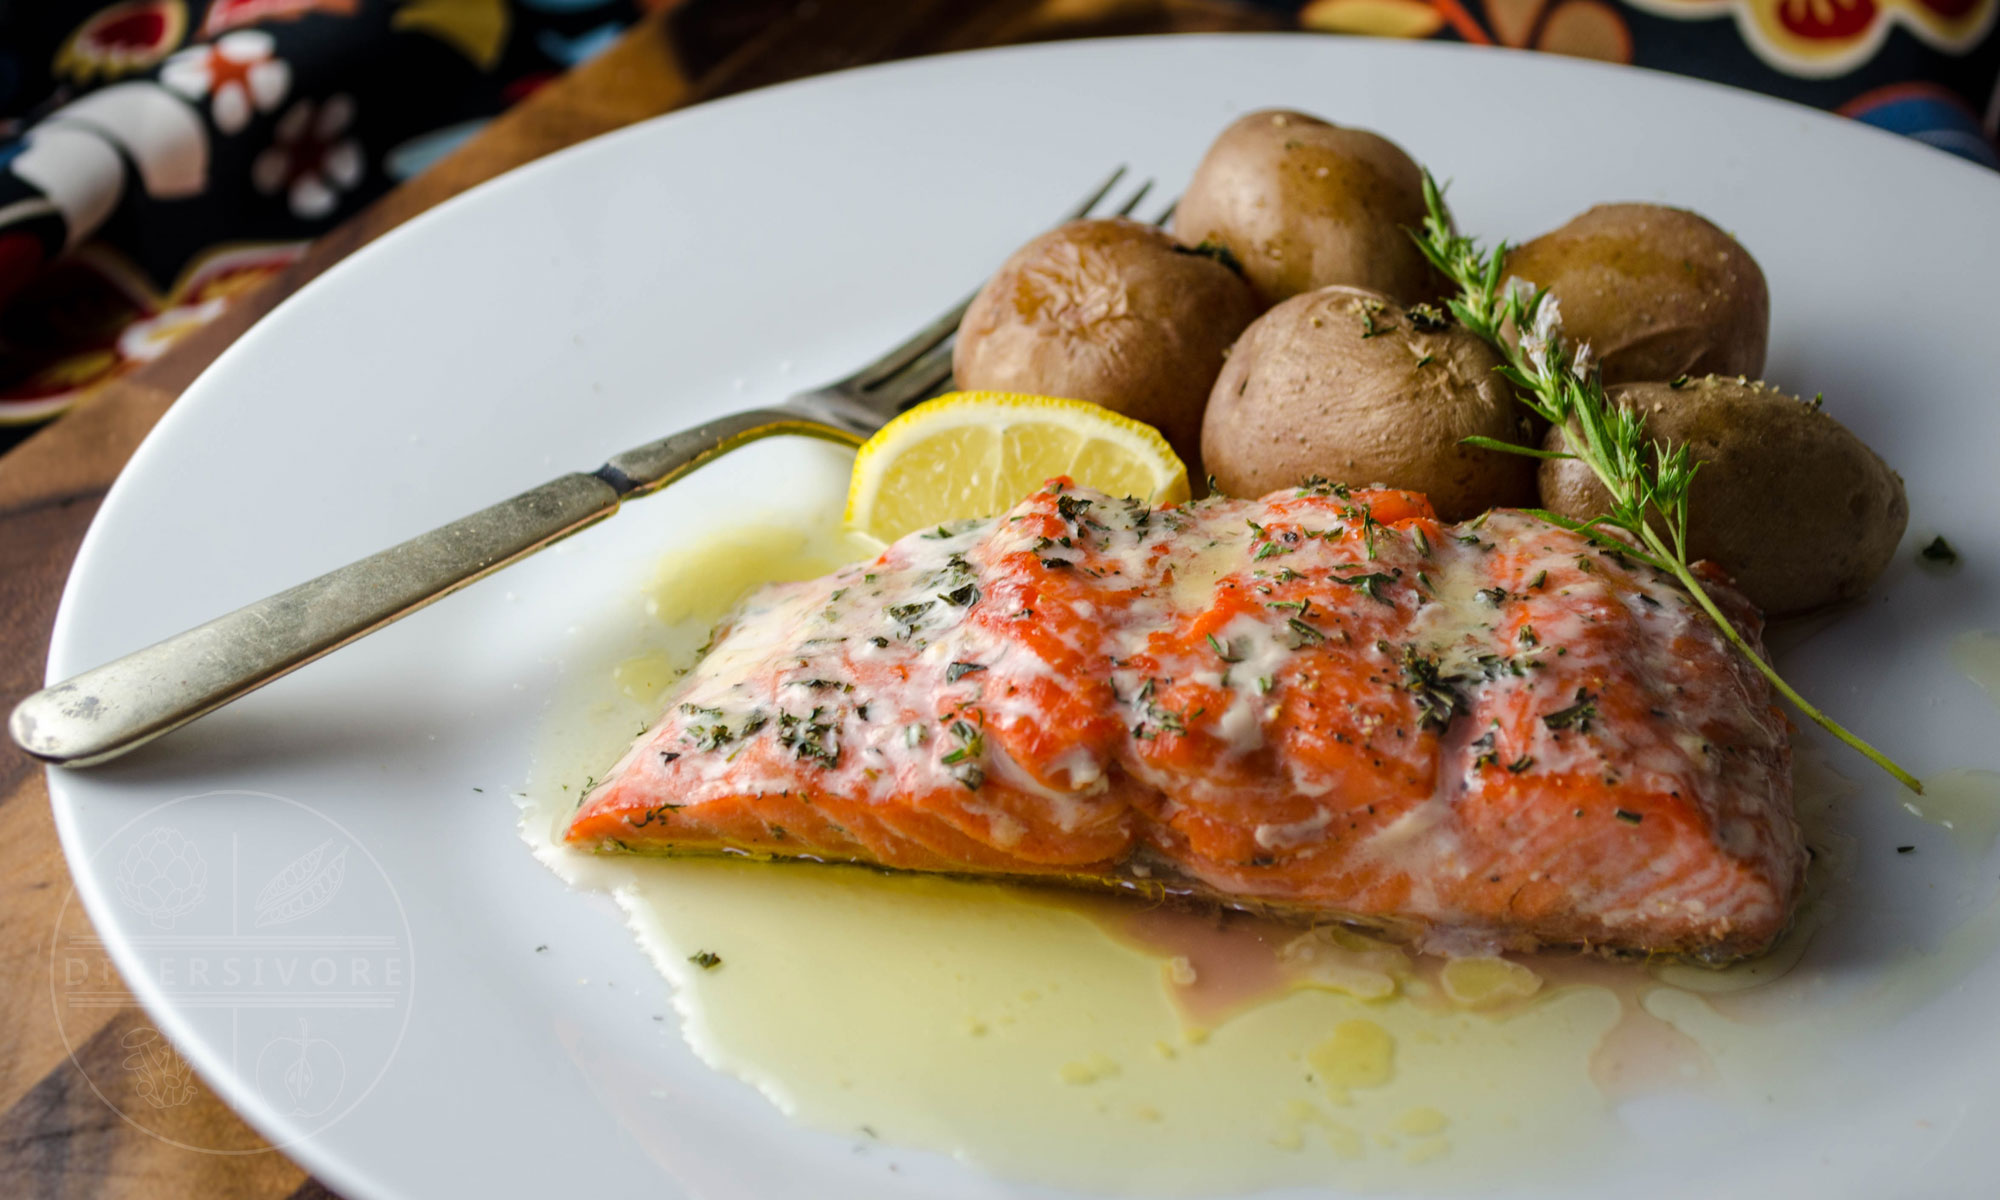 Salmon with fresh herbs and lemon-garlic butter, served on a white plate with new potatoes and a sprig of winter savoury